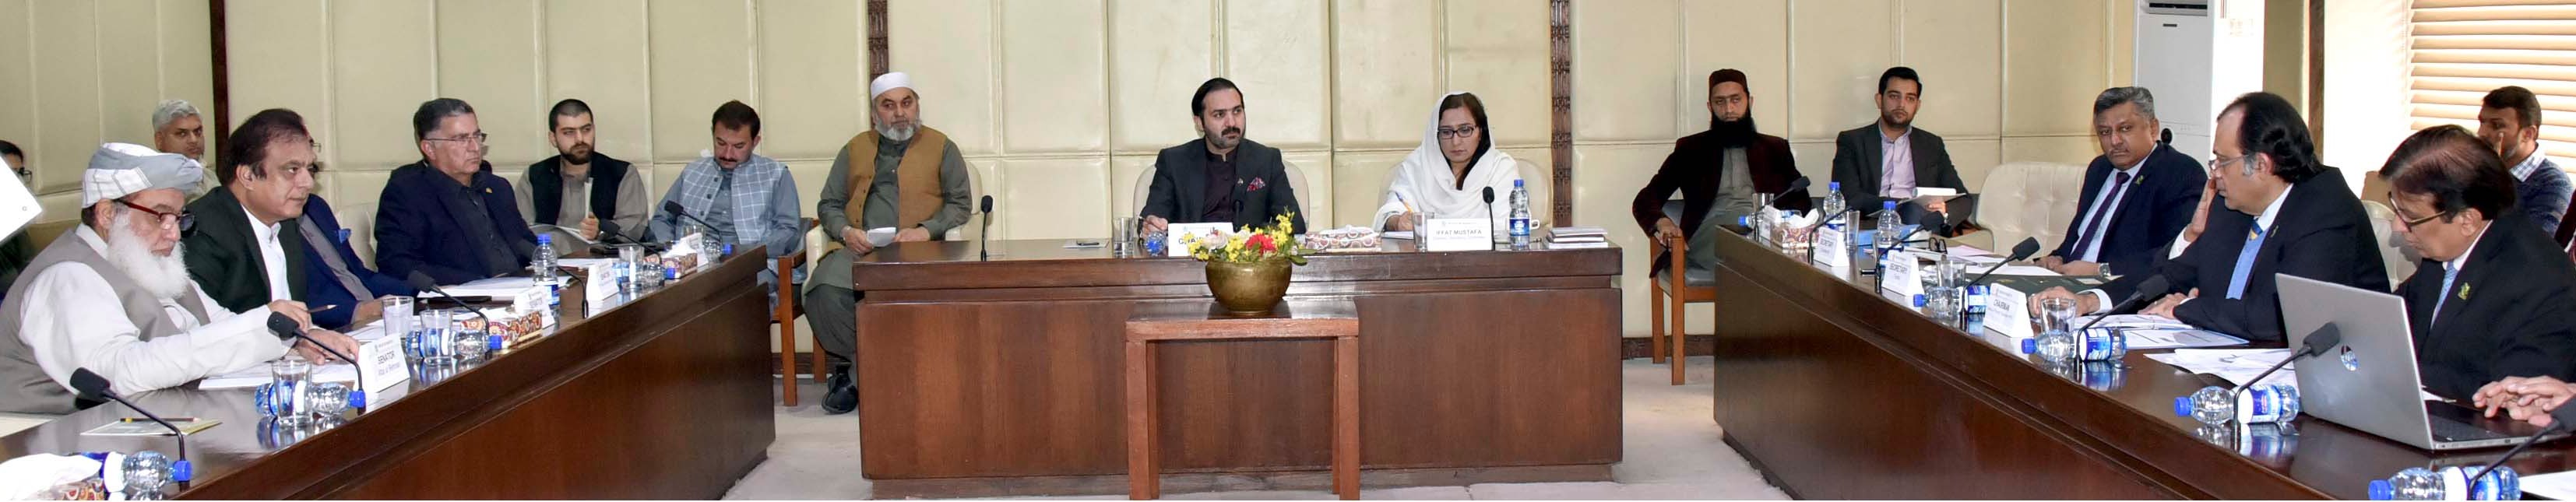 SENATOR MIRZA MUHAMMAD AFRIDI, CHAIRMAN SENATE STANDING COMMITTEE ON COMMERCE AND TEXTILE INDUSTRY PRESIDING OVER A MEETING OF THE COMMITTEE AT PARLIAMENT HOUSE ISLAMABAD ON MARCH 06, 2019.